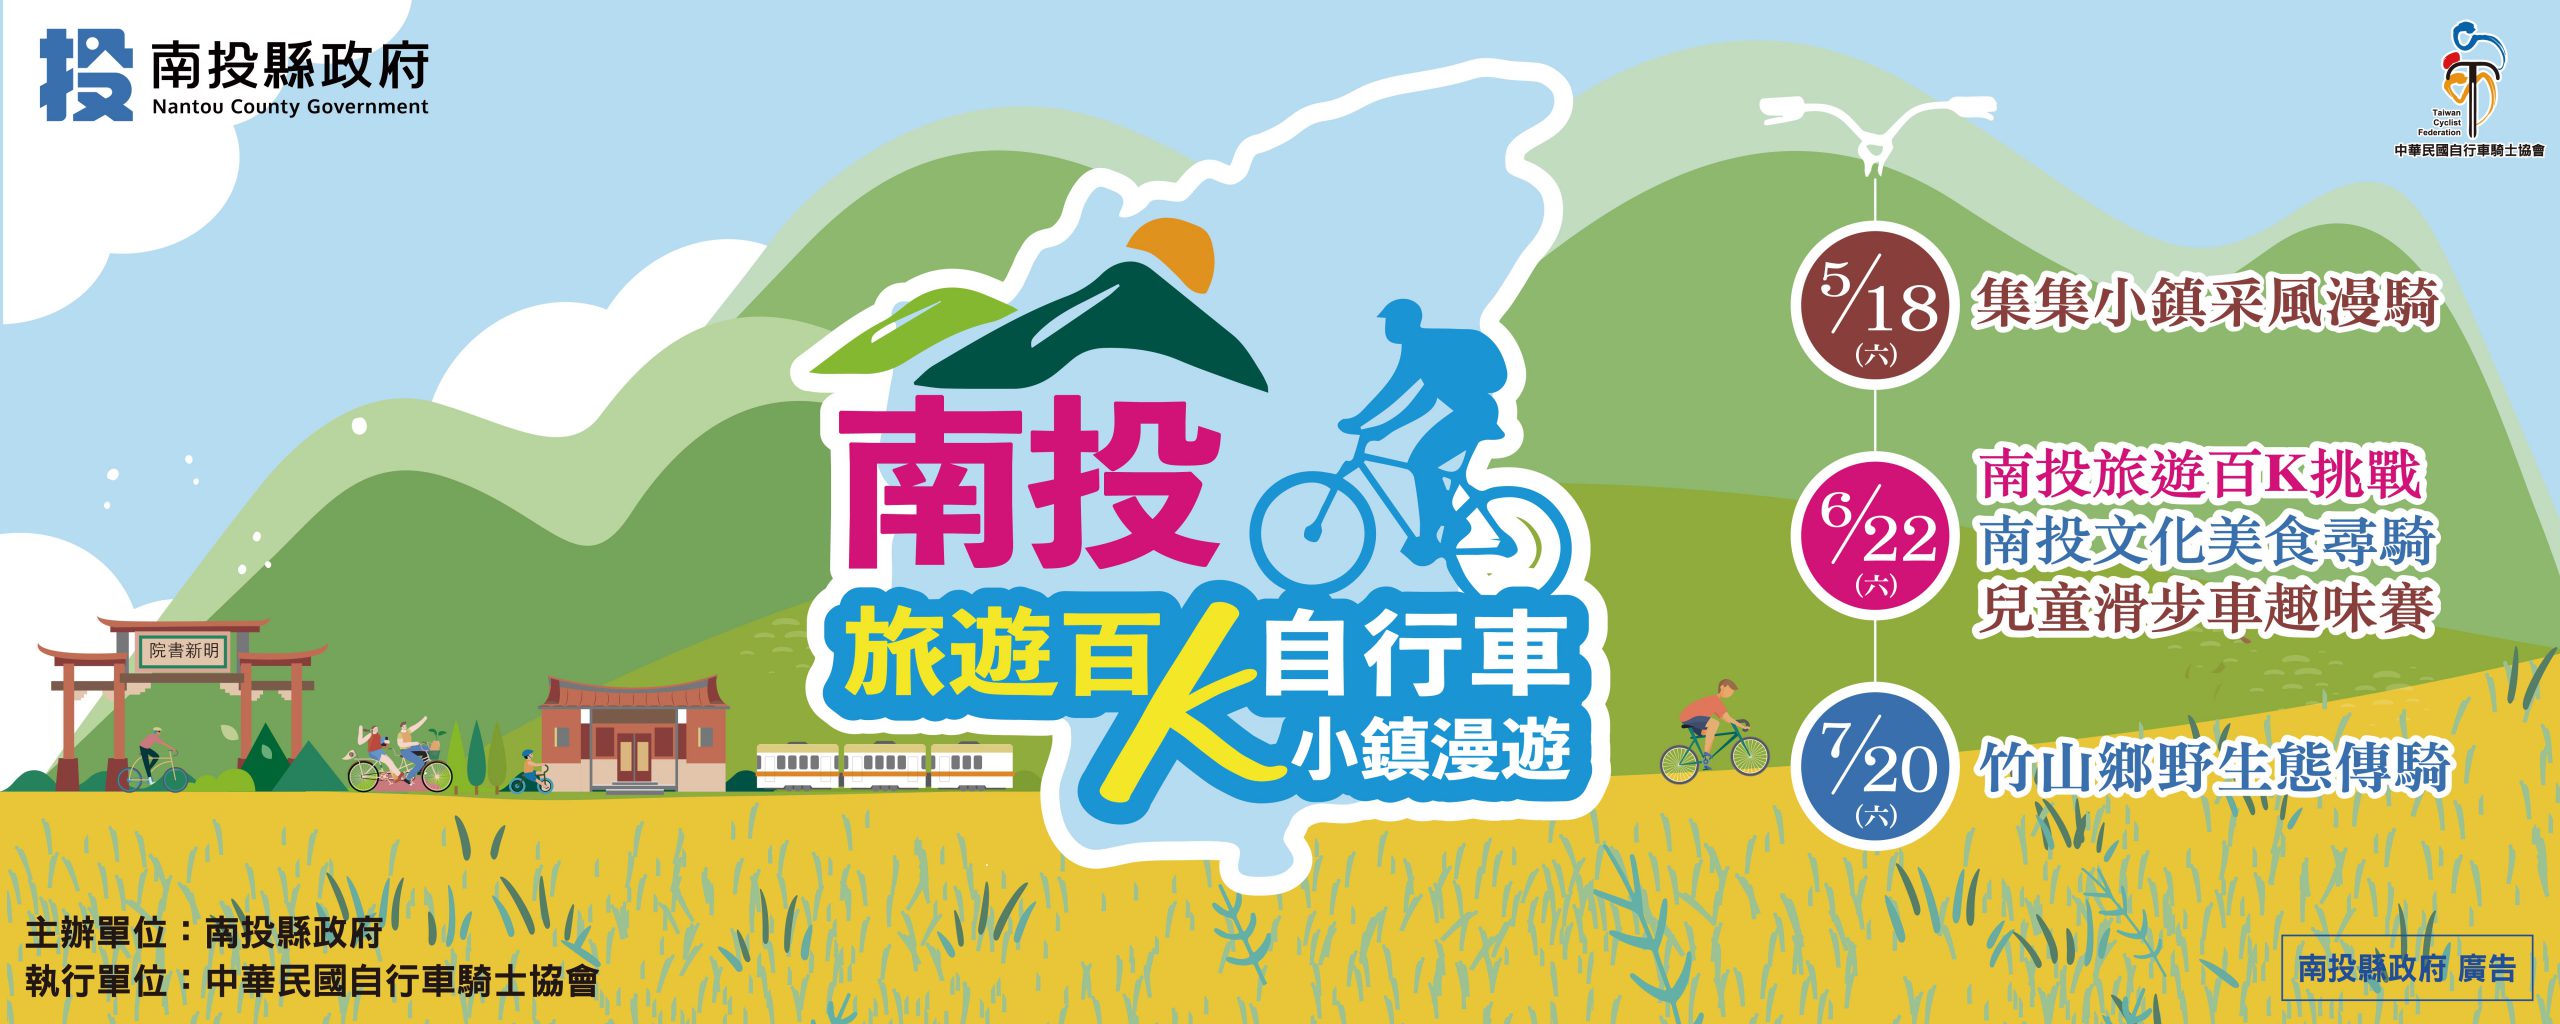 Nantou Travel 100K Bicycle Series Event Launch Press Conference: Inviting Everyone to Accumulate 100K Travel Miles by Cycling in Nantou